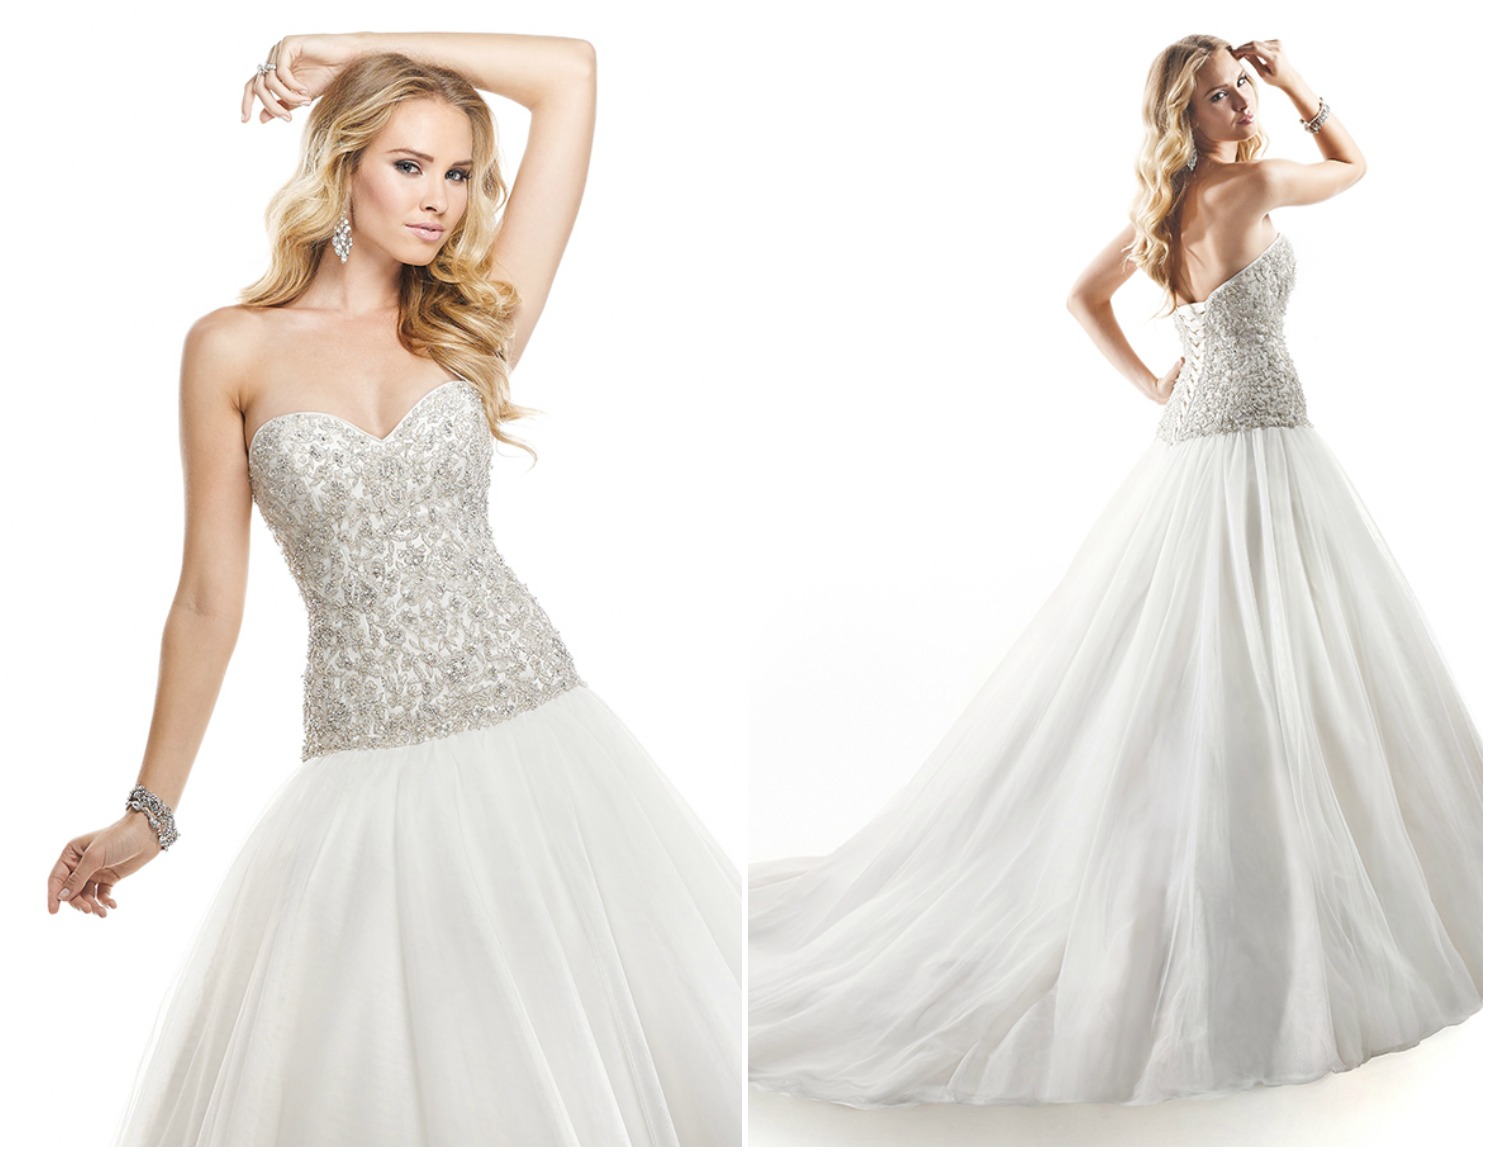 <a href="http://www.maggiesottero.com/dress.aspx?style=4MT852LU" target="_blank">Maggie Sottero</a>